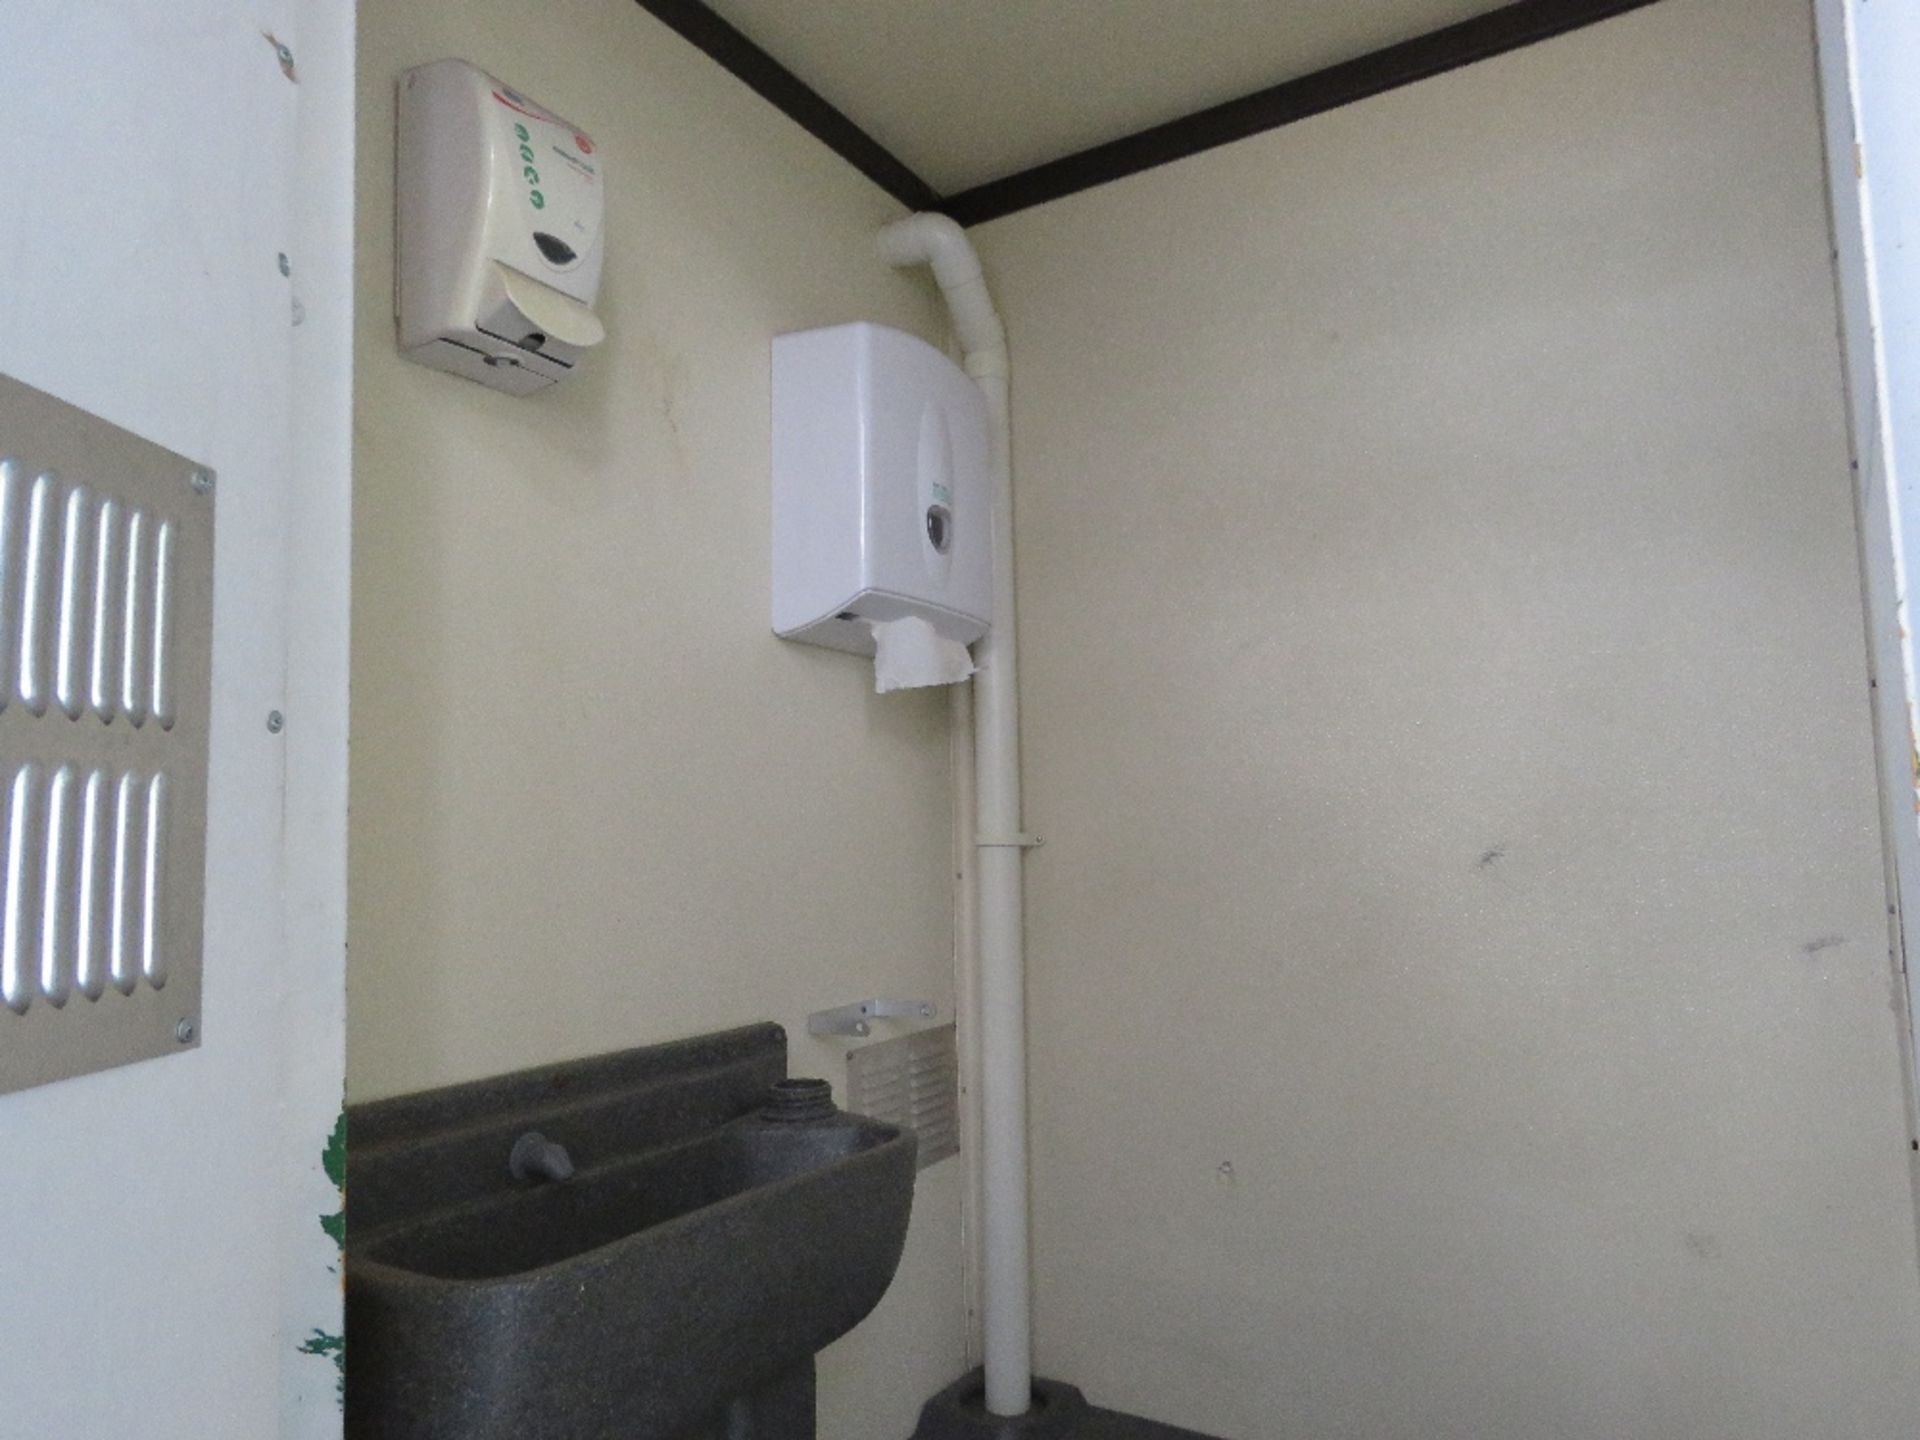 GROUNDHOG TOWED WELFARE UNIT WITH KITCHEN AREA, TOILET AND DRYING AREA PLUS A DIESEL GENERATOR. WHEN - Image 7 of 13